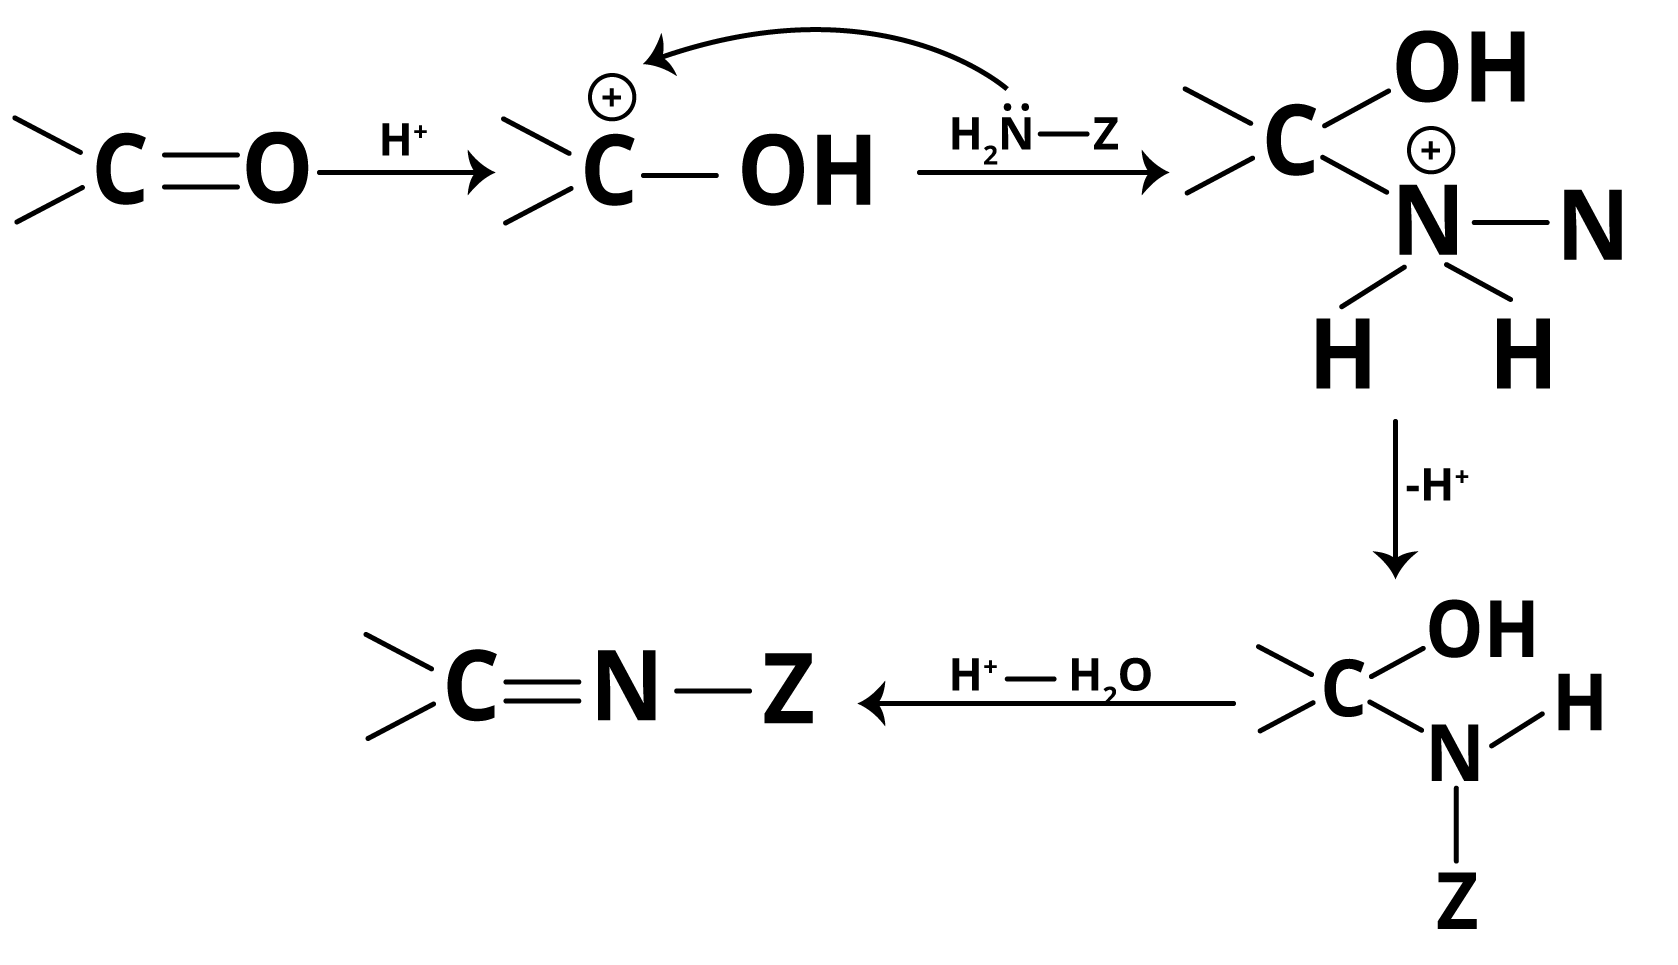 Addition of Ammonia and its Derivatives Mechanism